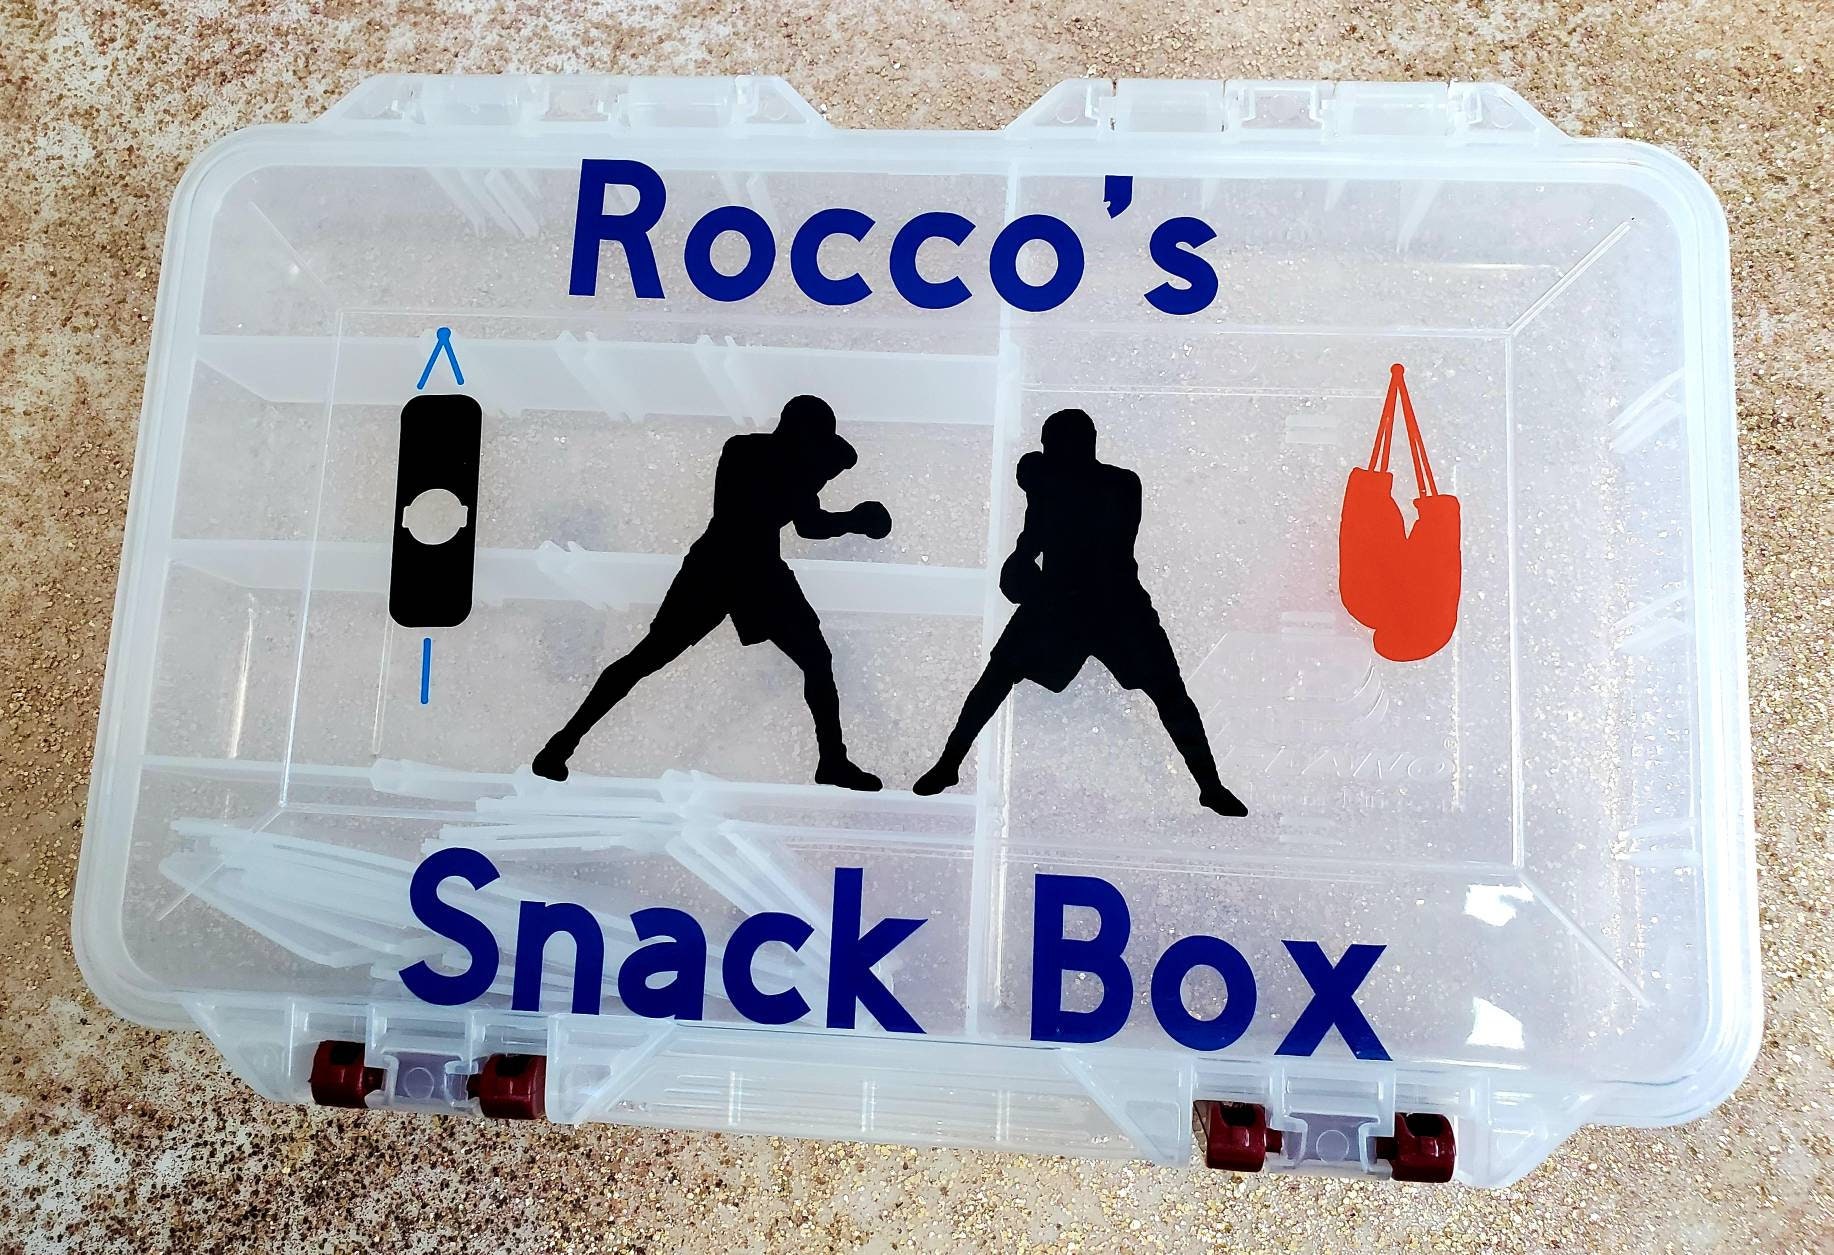 Personalize Travel Snack Box/snackle Box/ Snack Box for Kids 